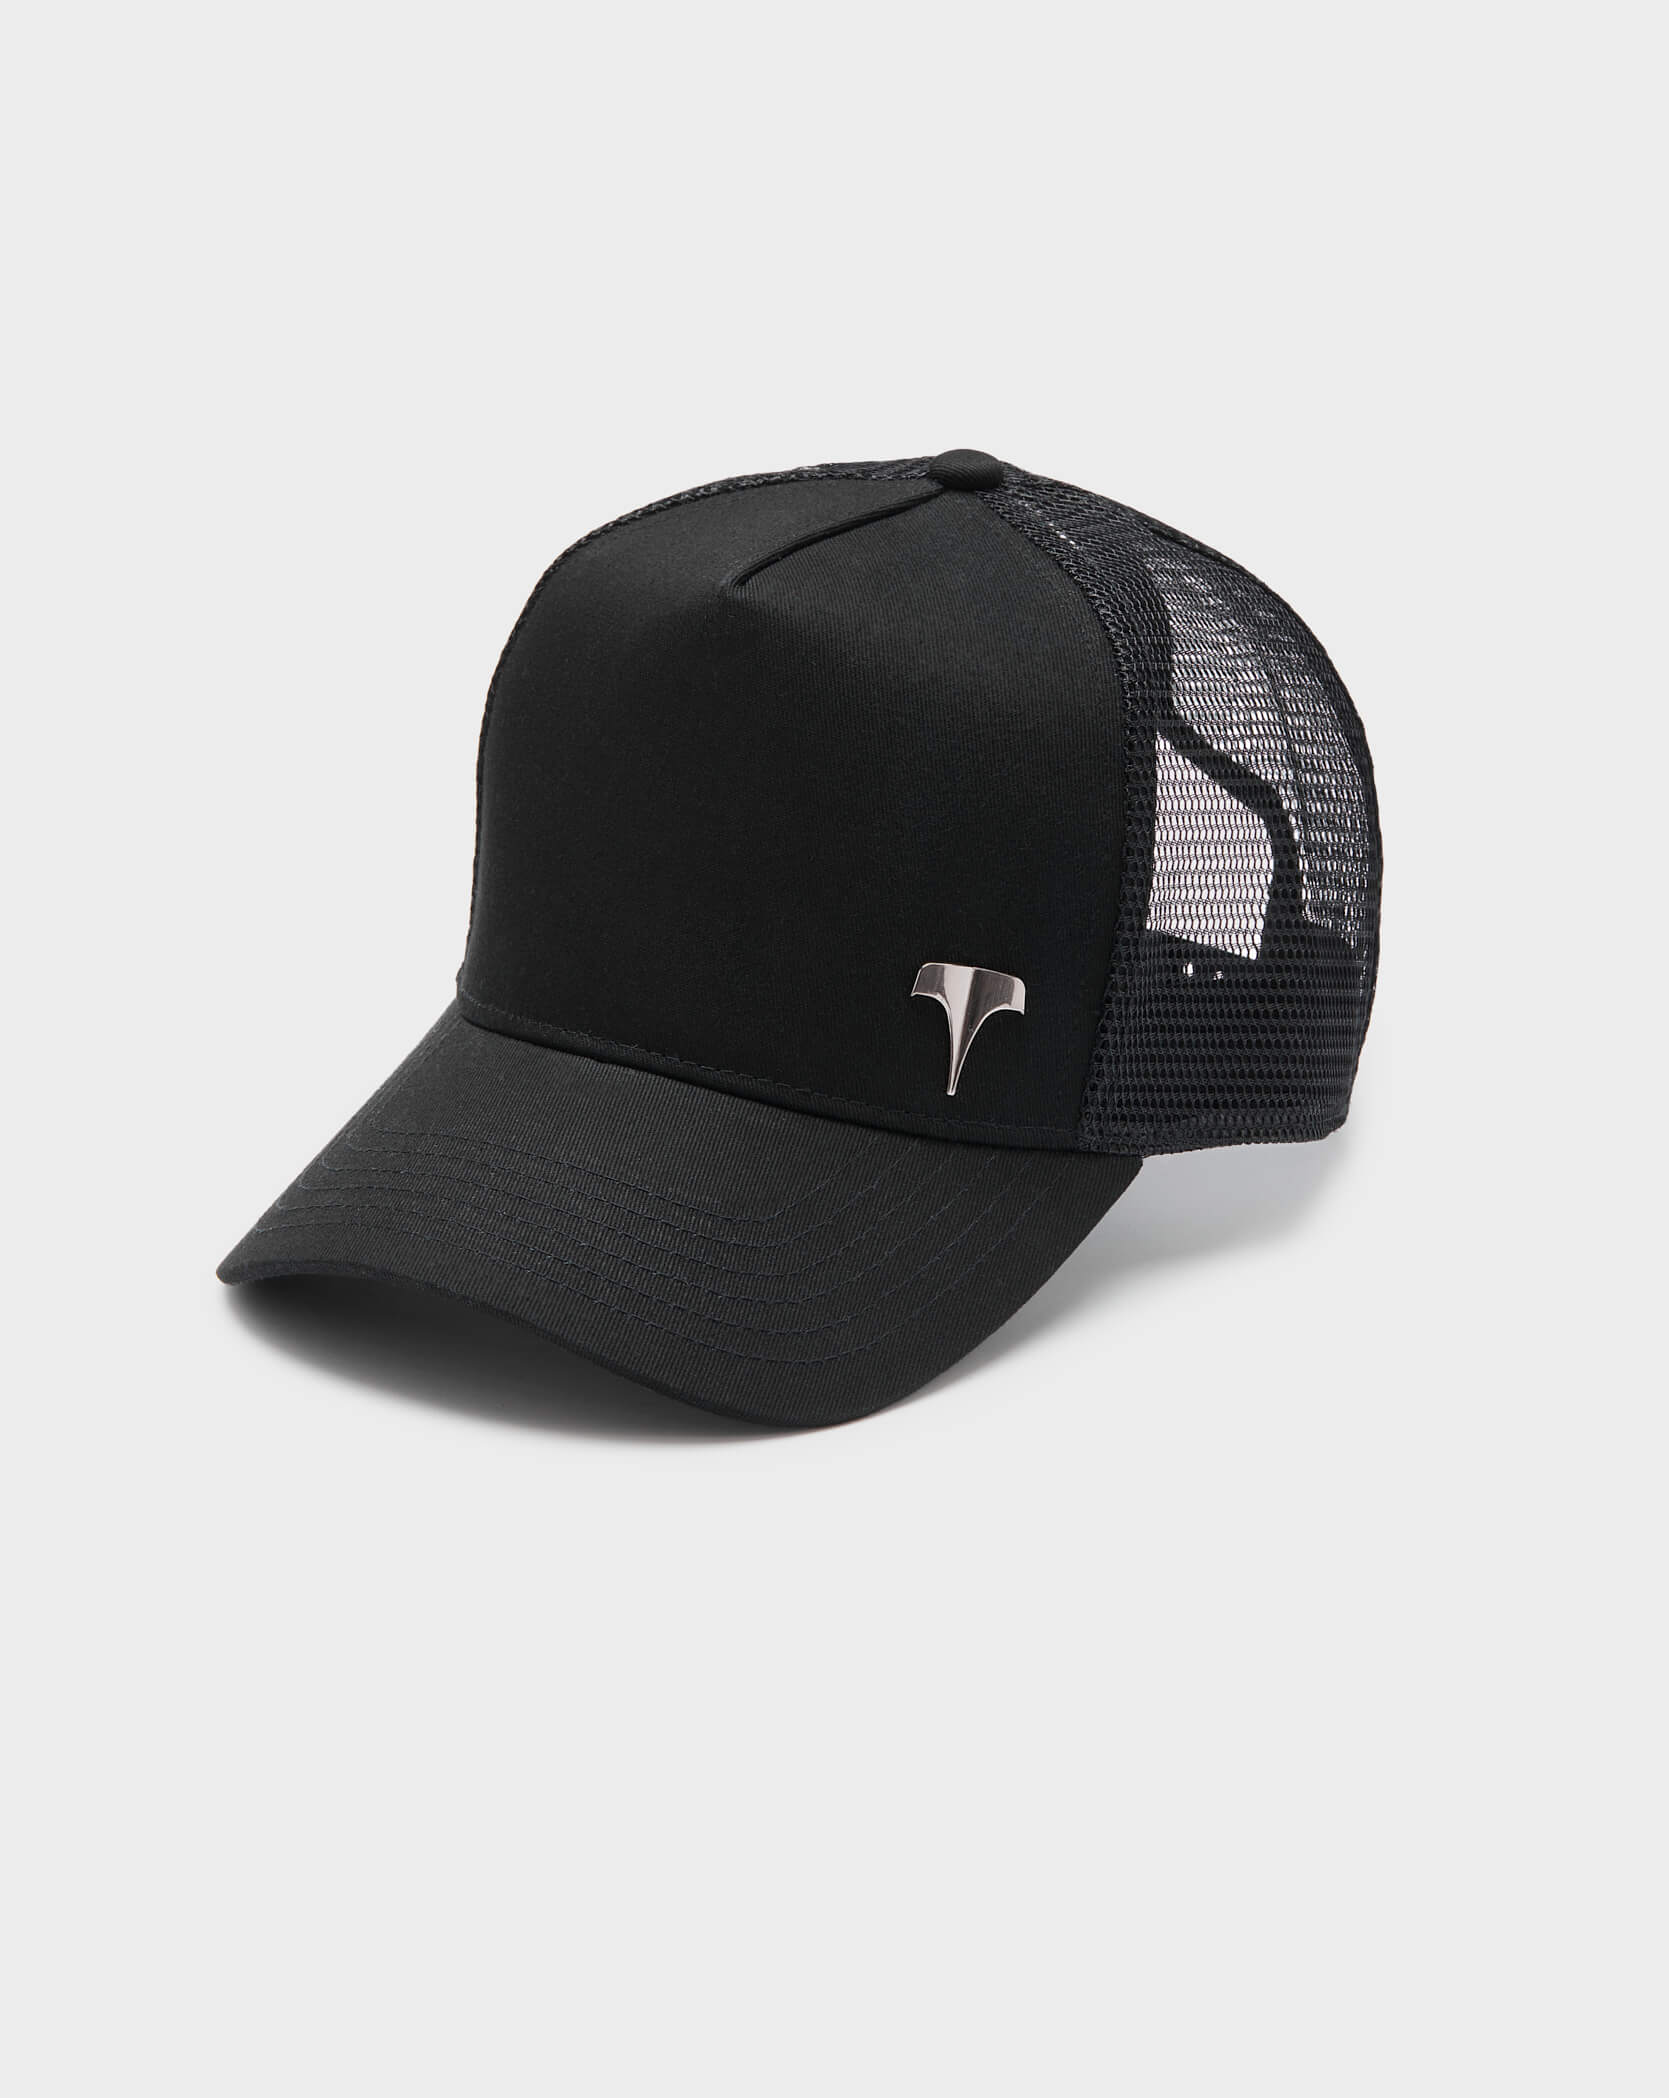 Twinzz black trucker cap with small silver logo